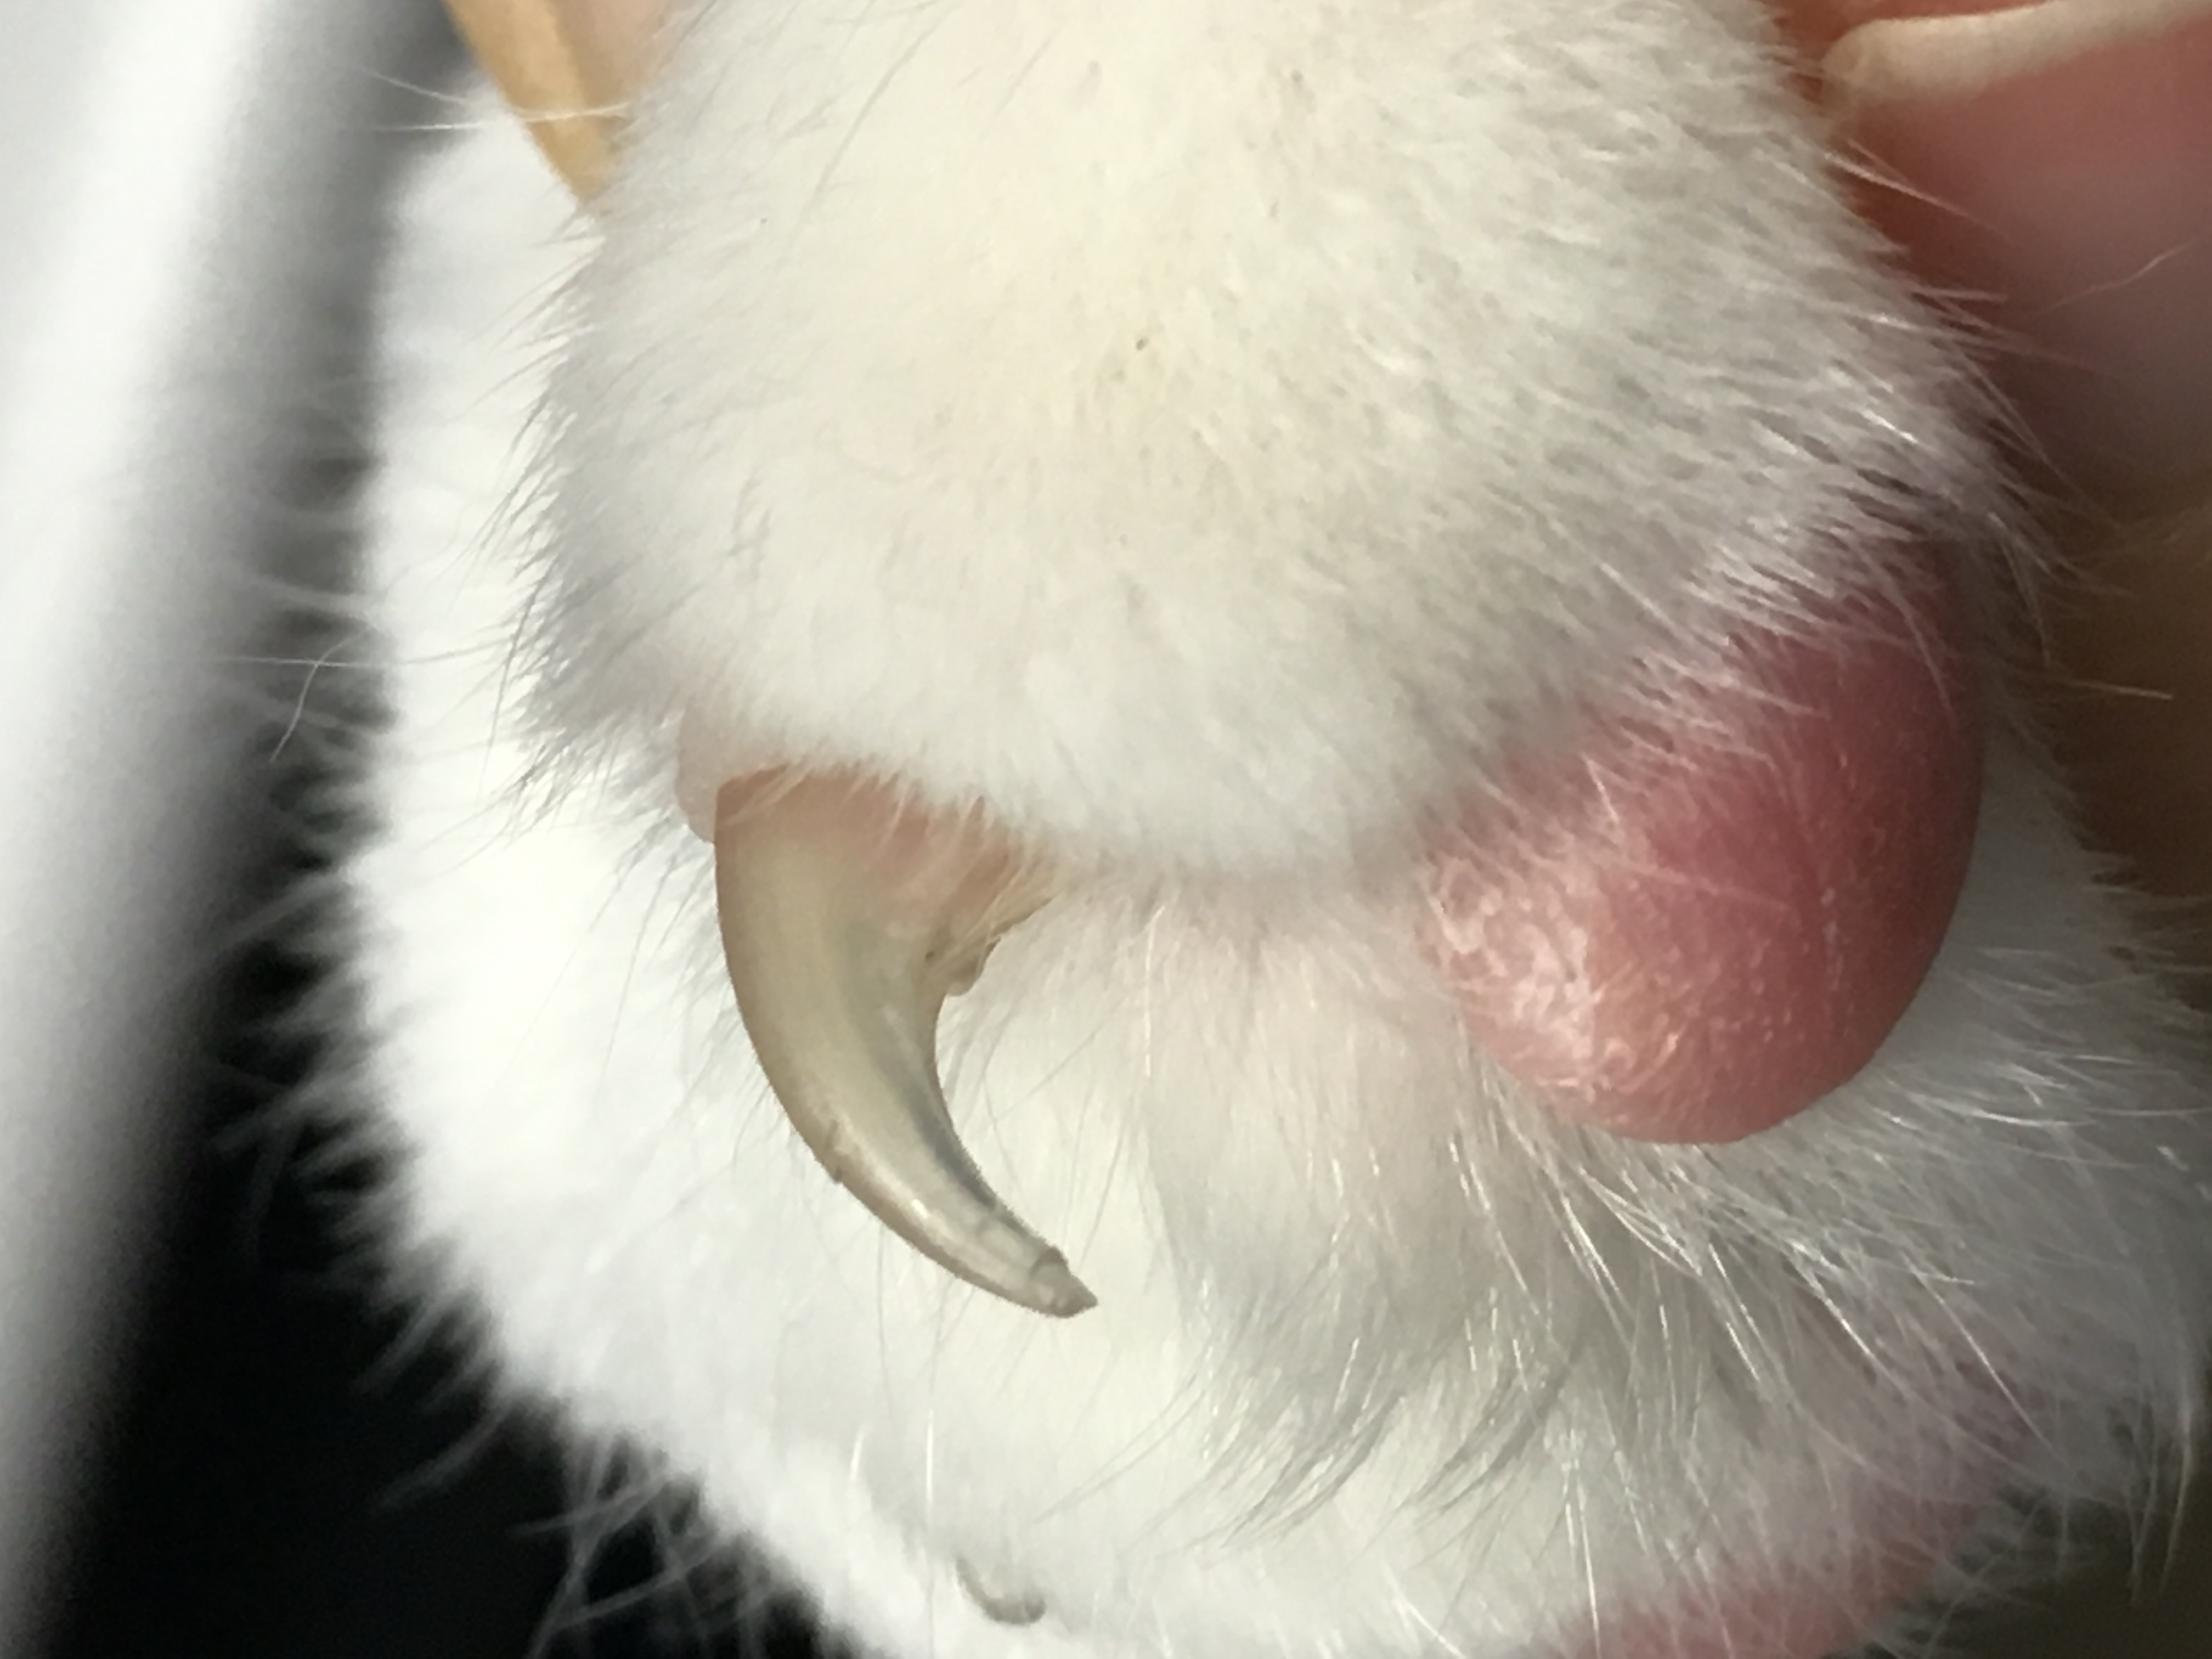 How to trim cat nails - Sherbrooke Animal Hospital